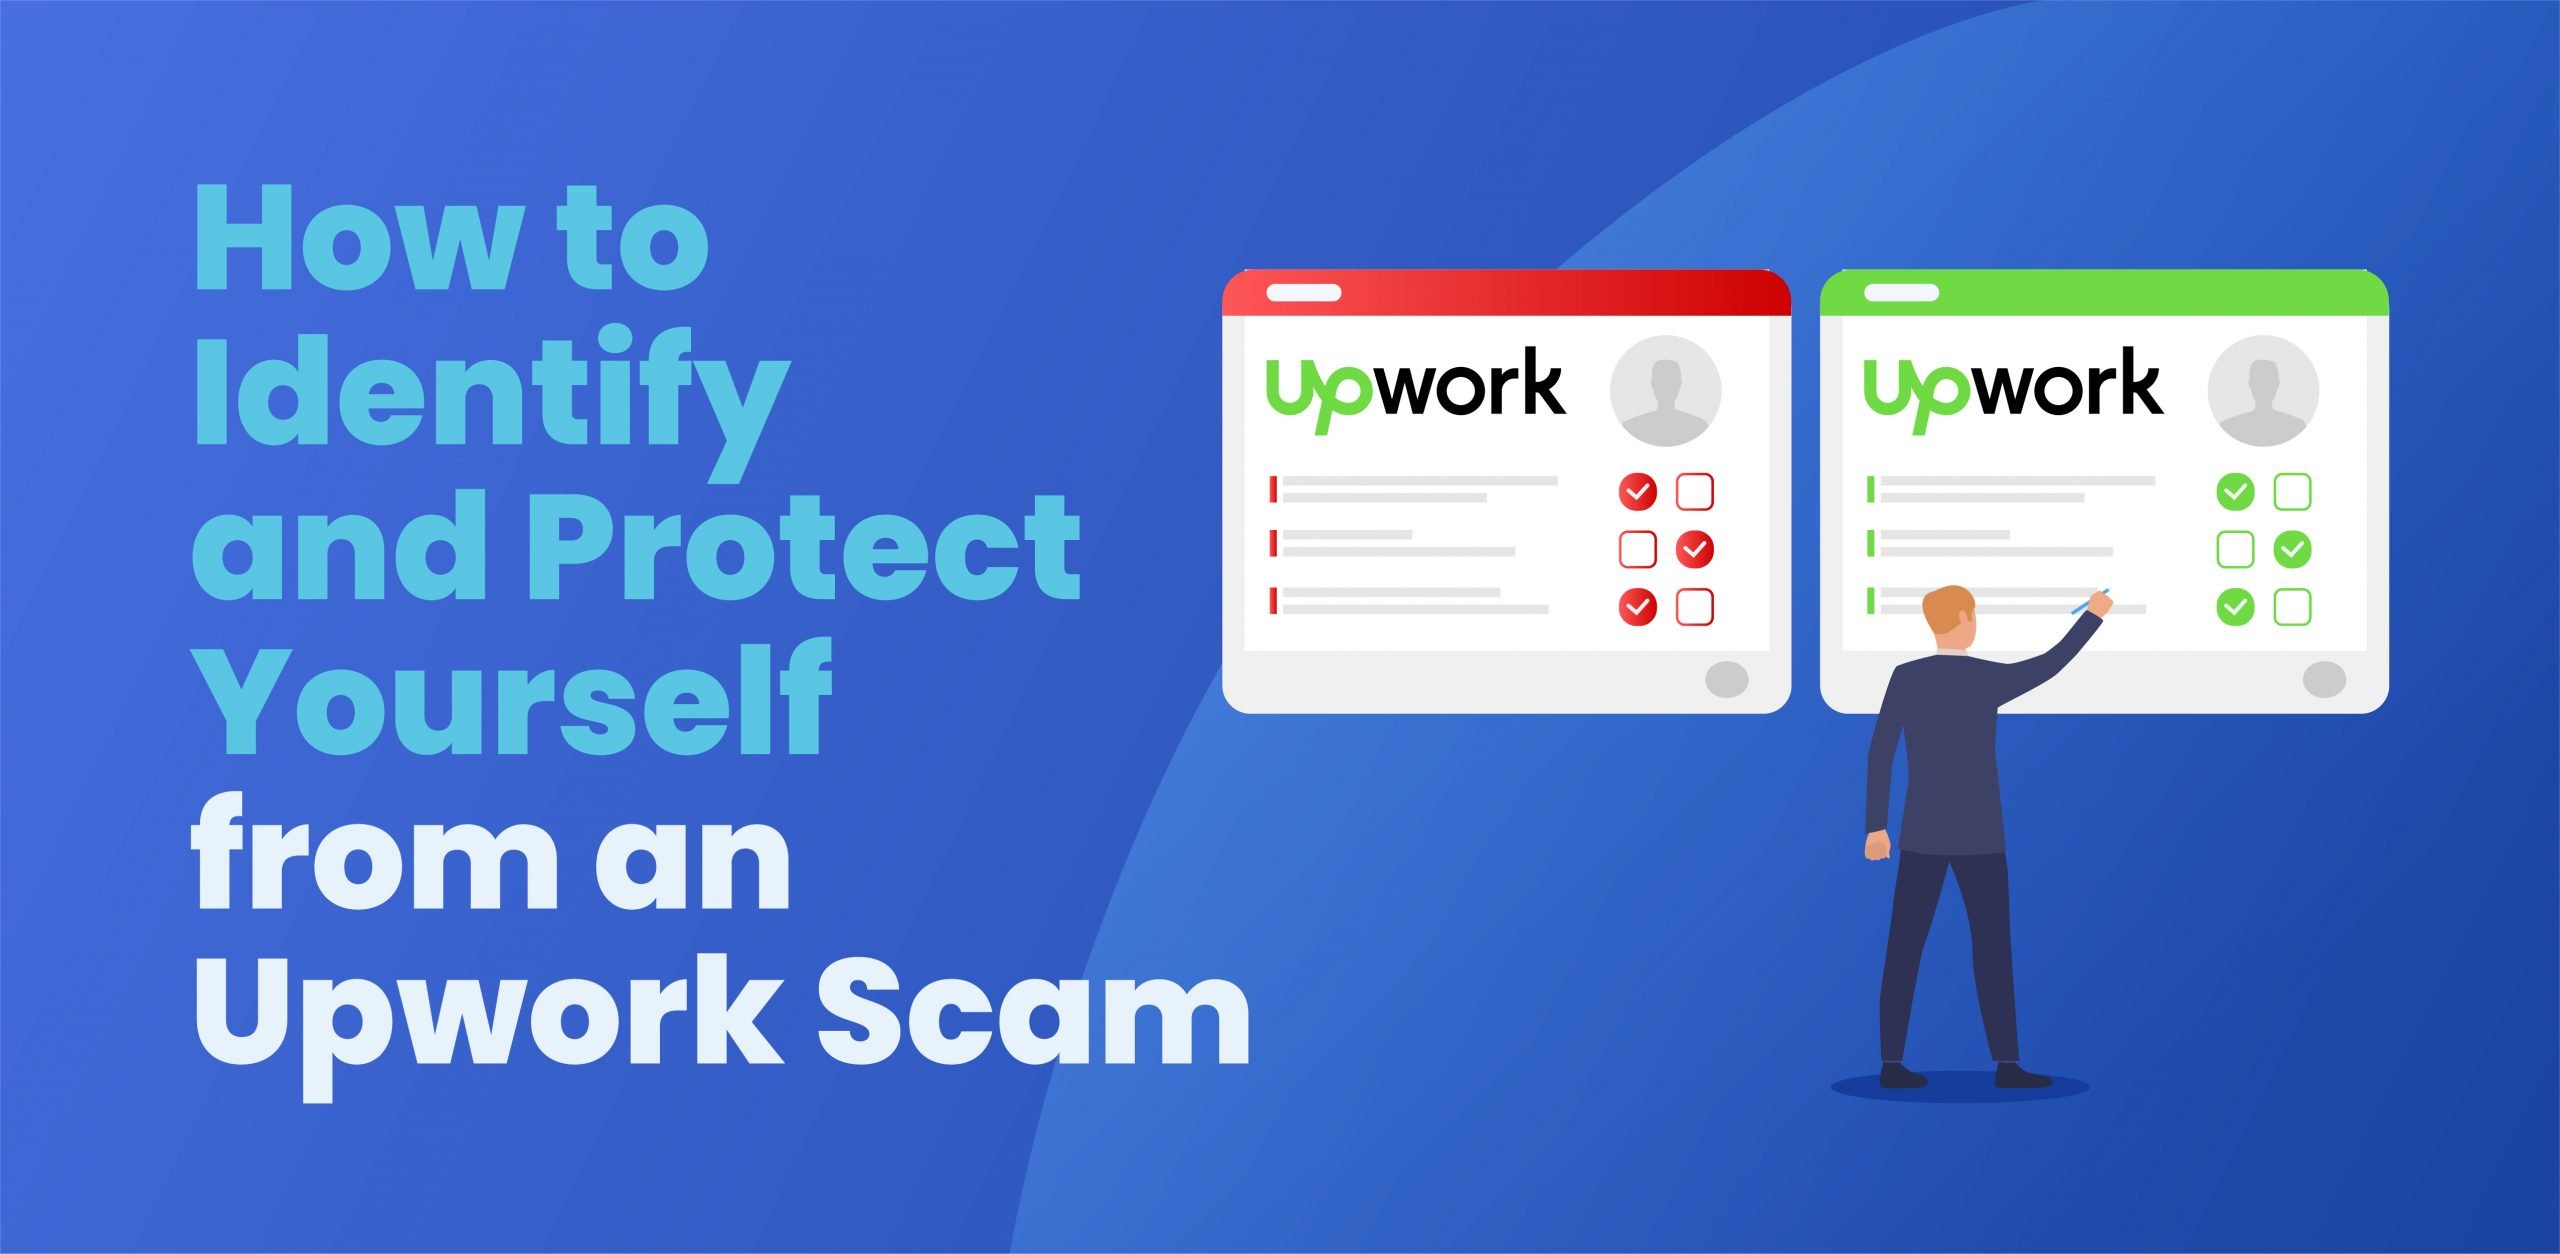 How to Identify and Protect Yourself from an Upwork Scam